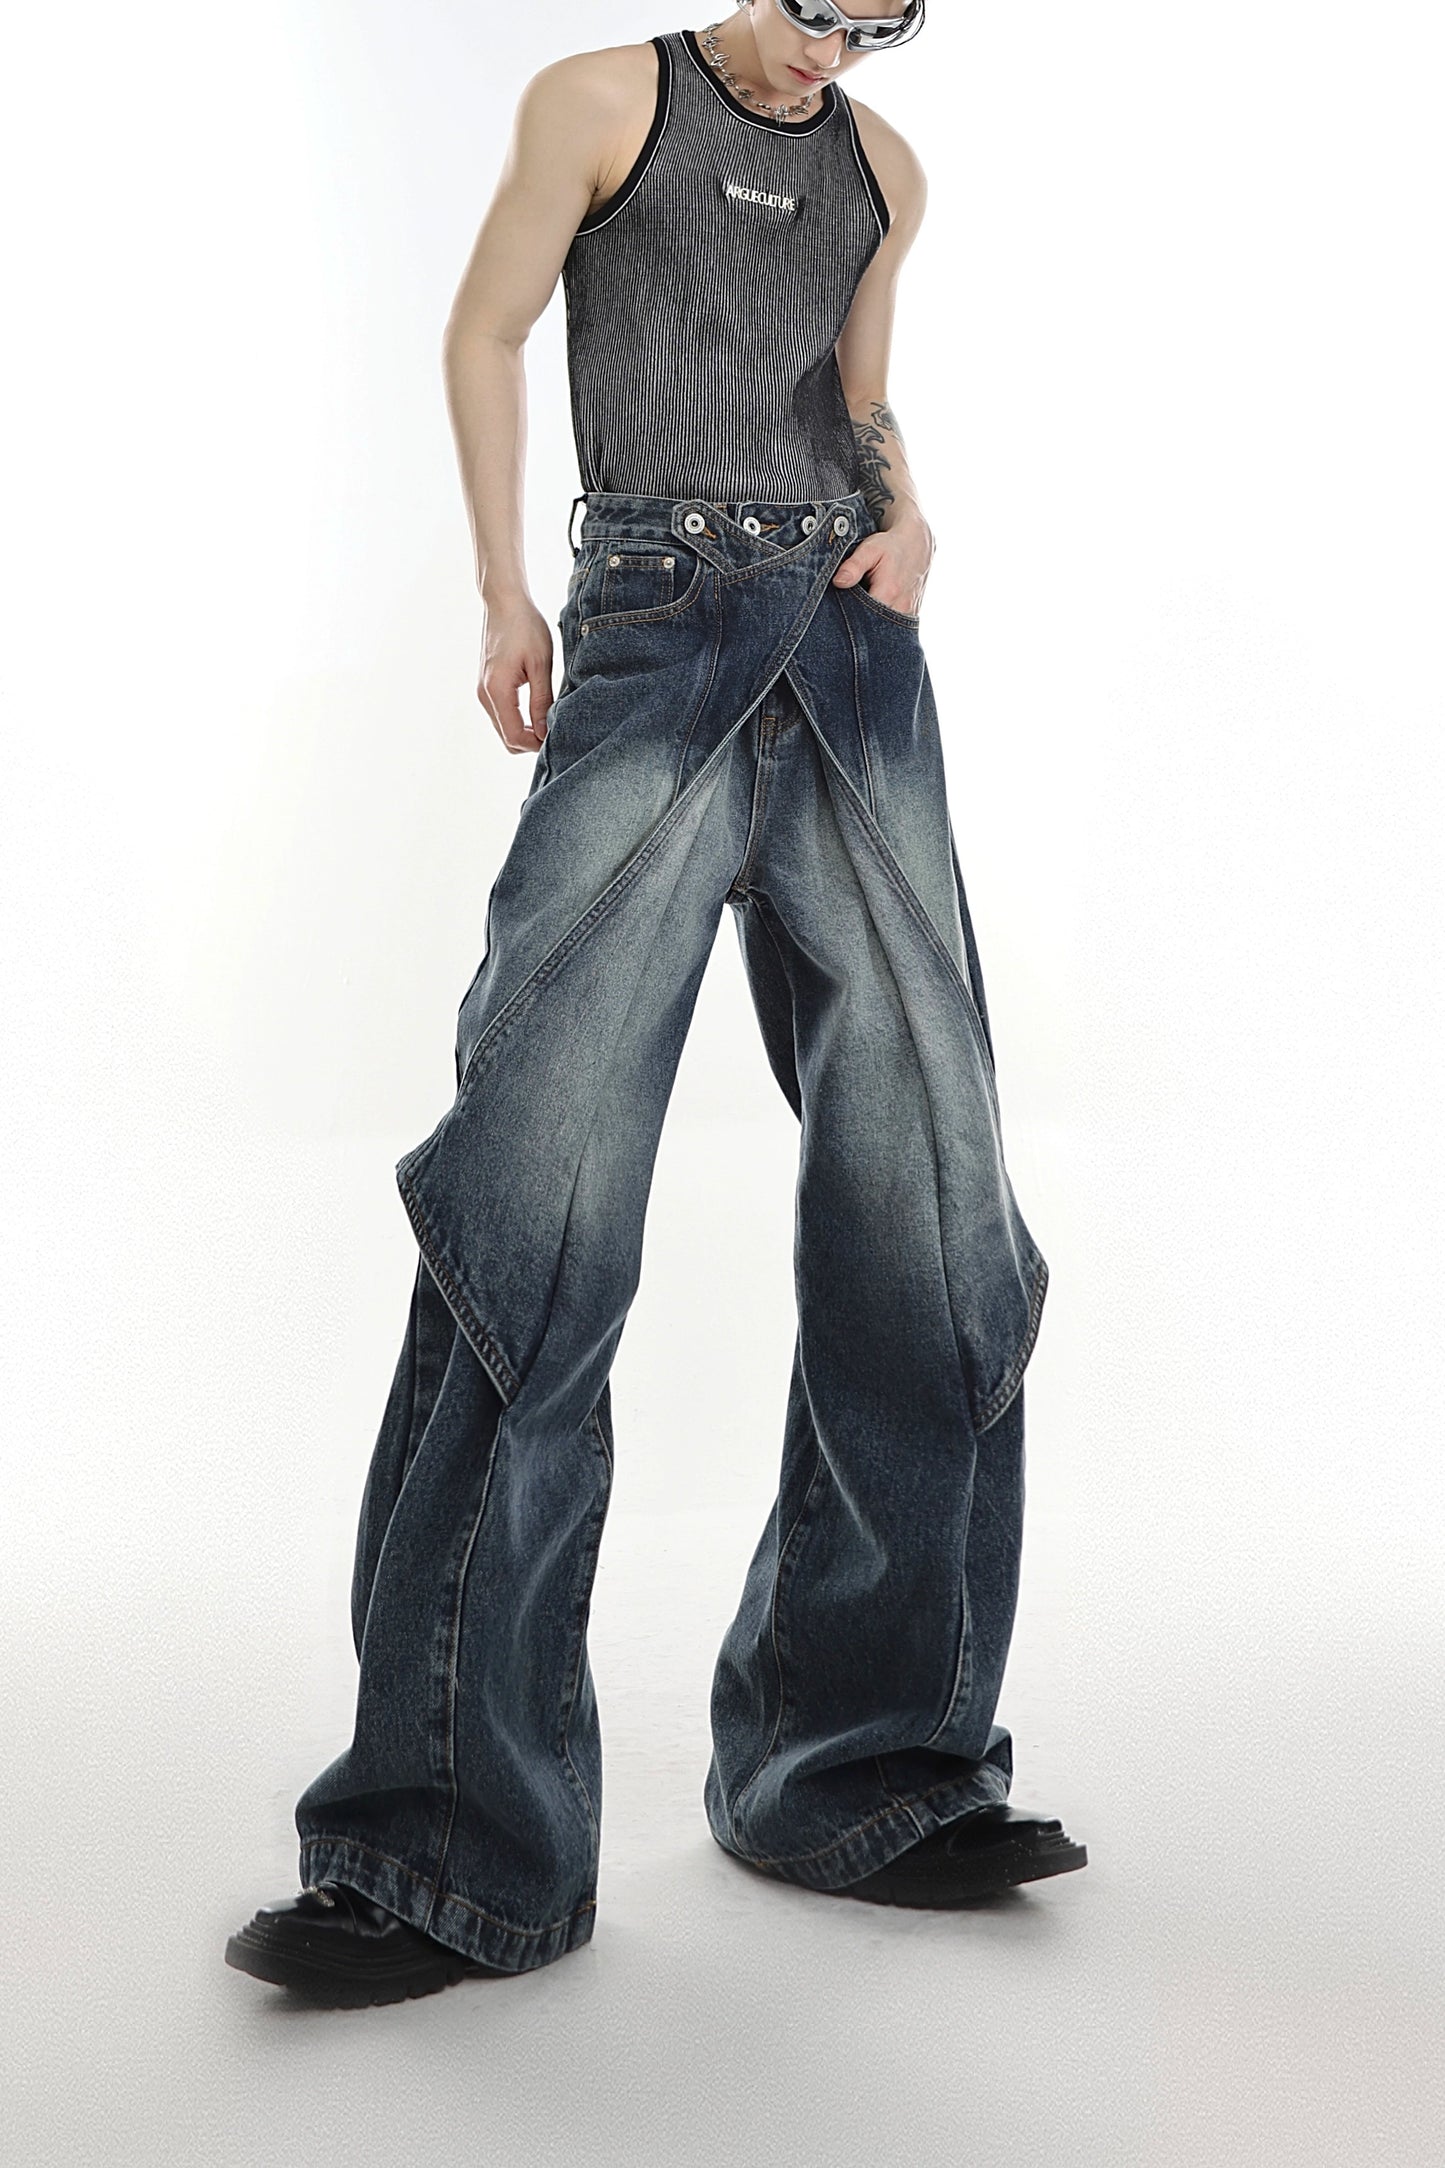 CulturE niche heavy work distressed washed jeans deconstruct the design sense of the cut-off flared pants wide-leg pants